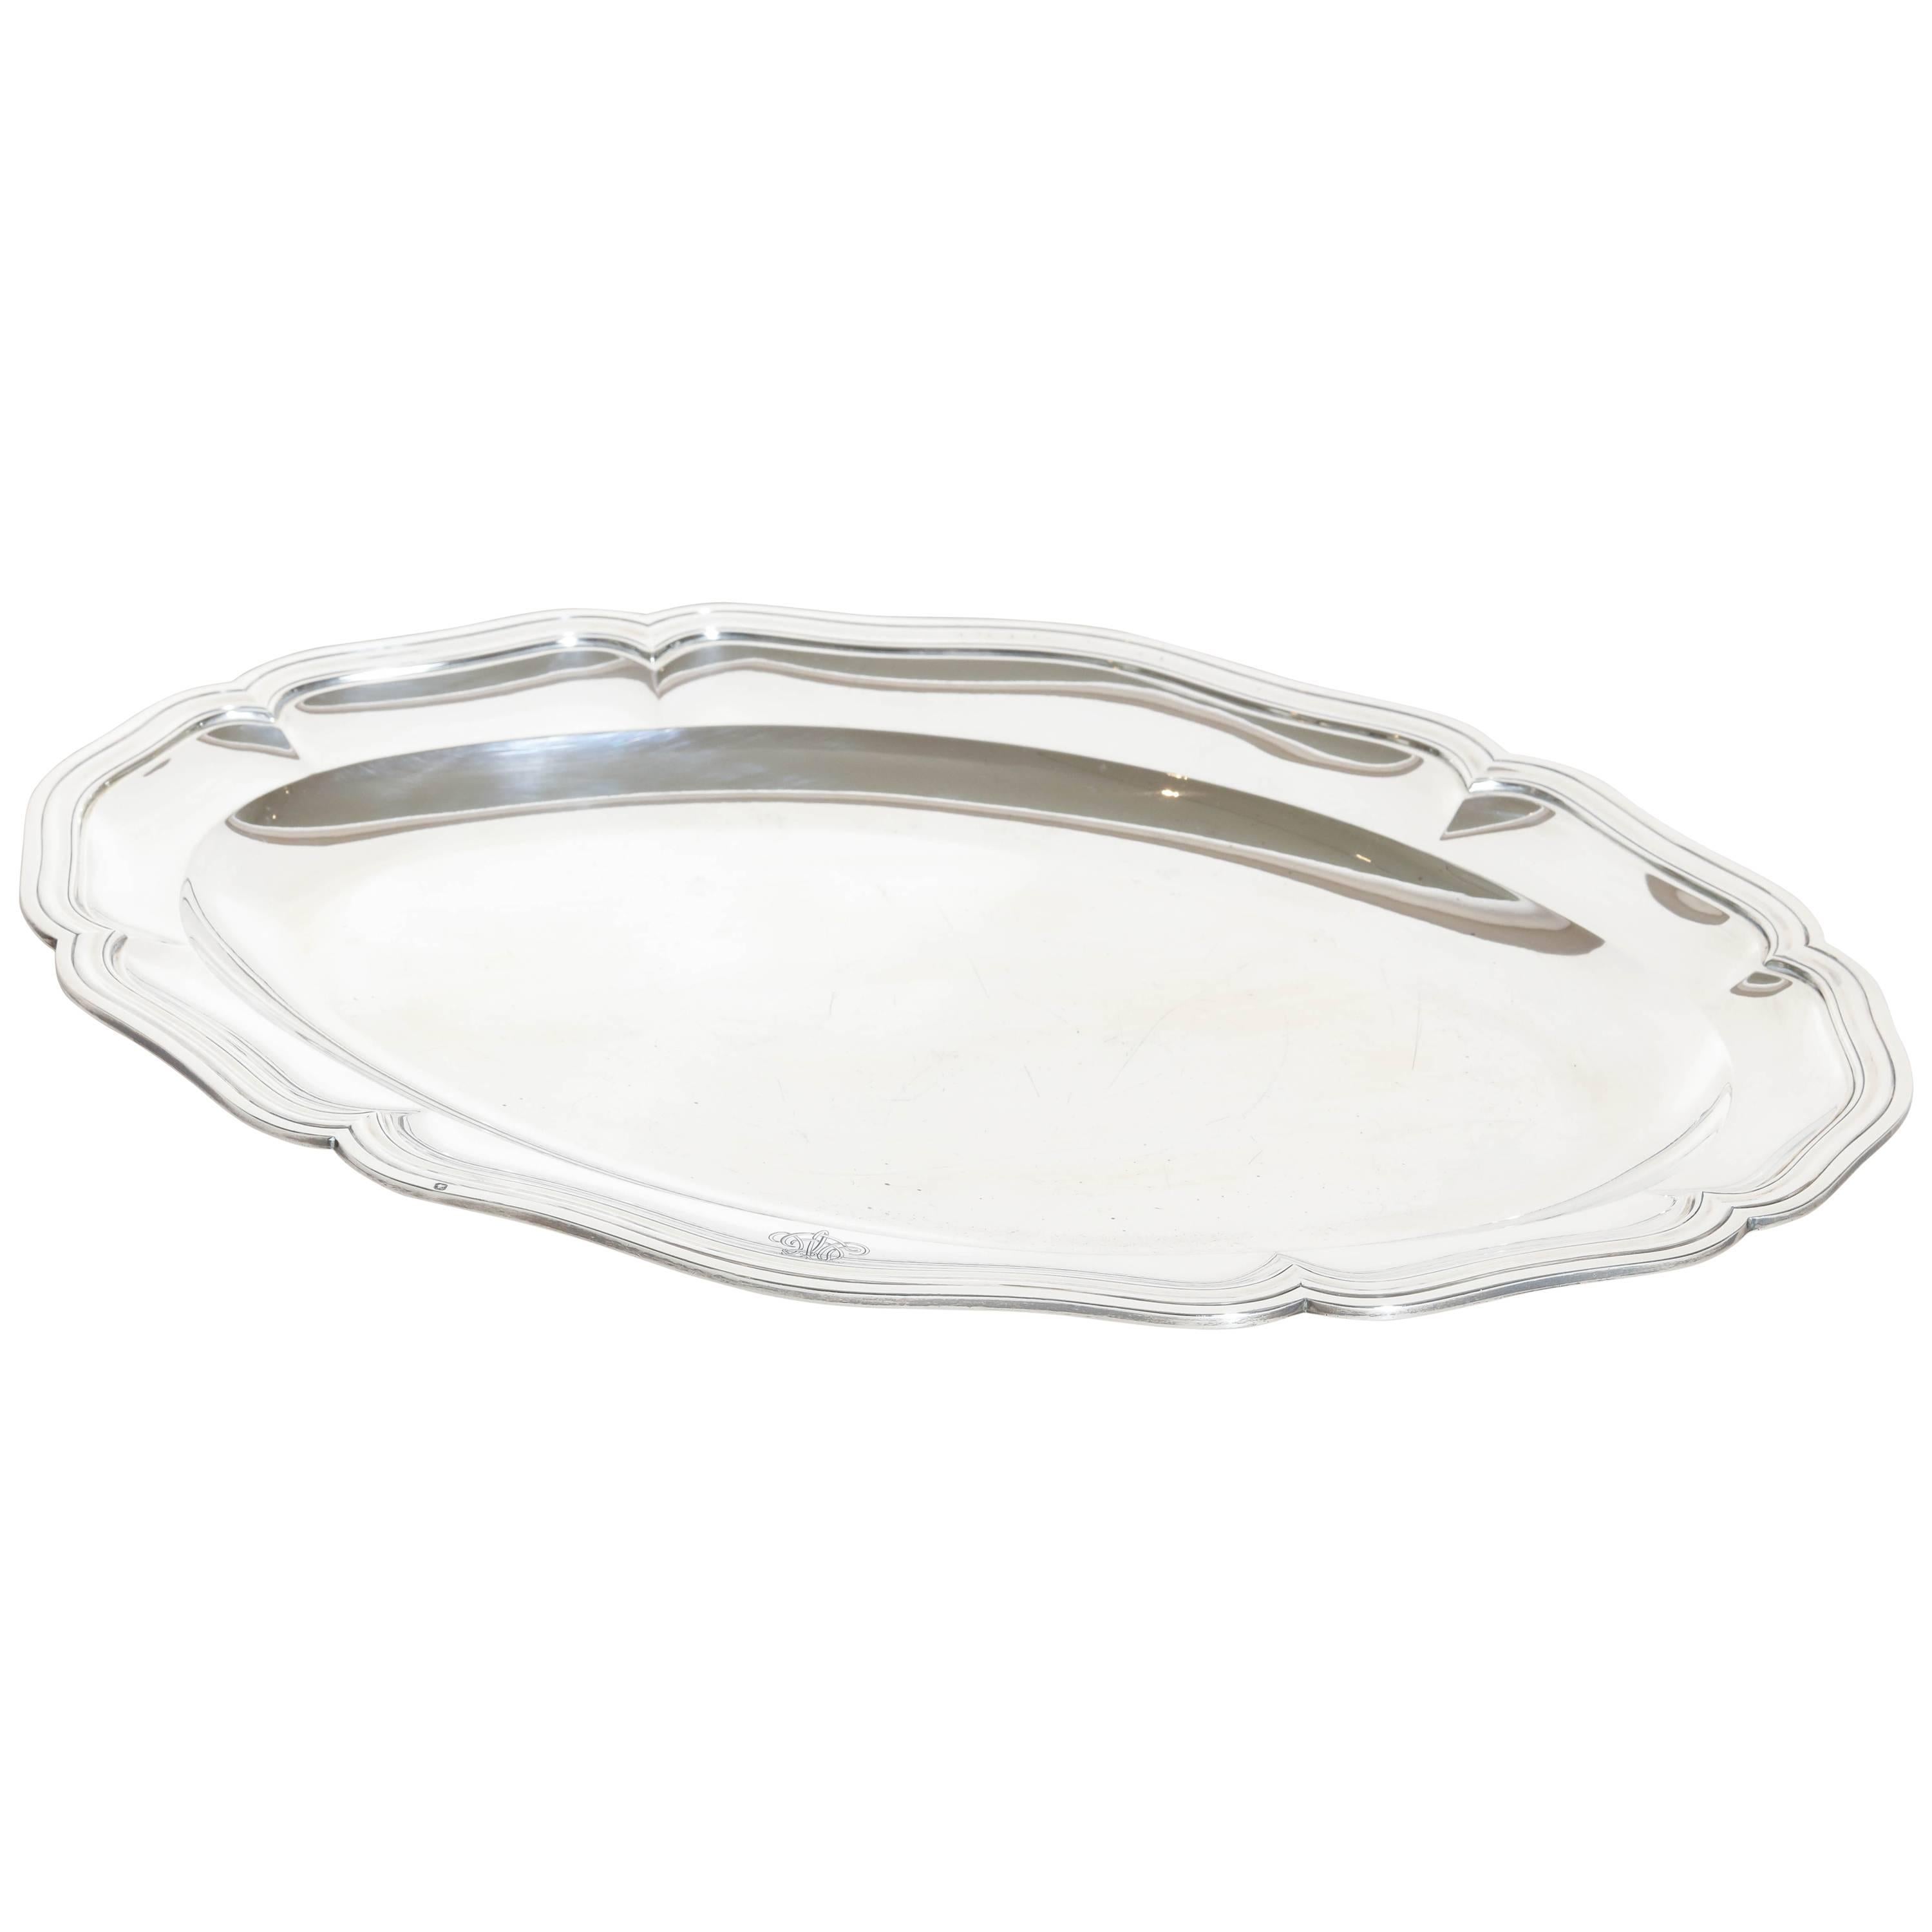 Robert Linzeler French Art Deco Oval Sterling Silver Tray For Sale